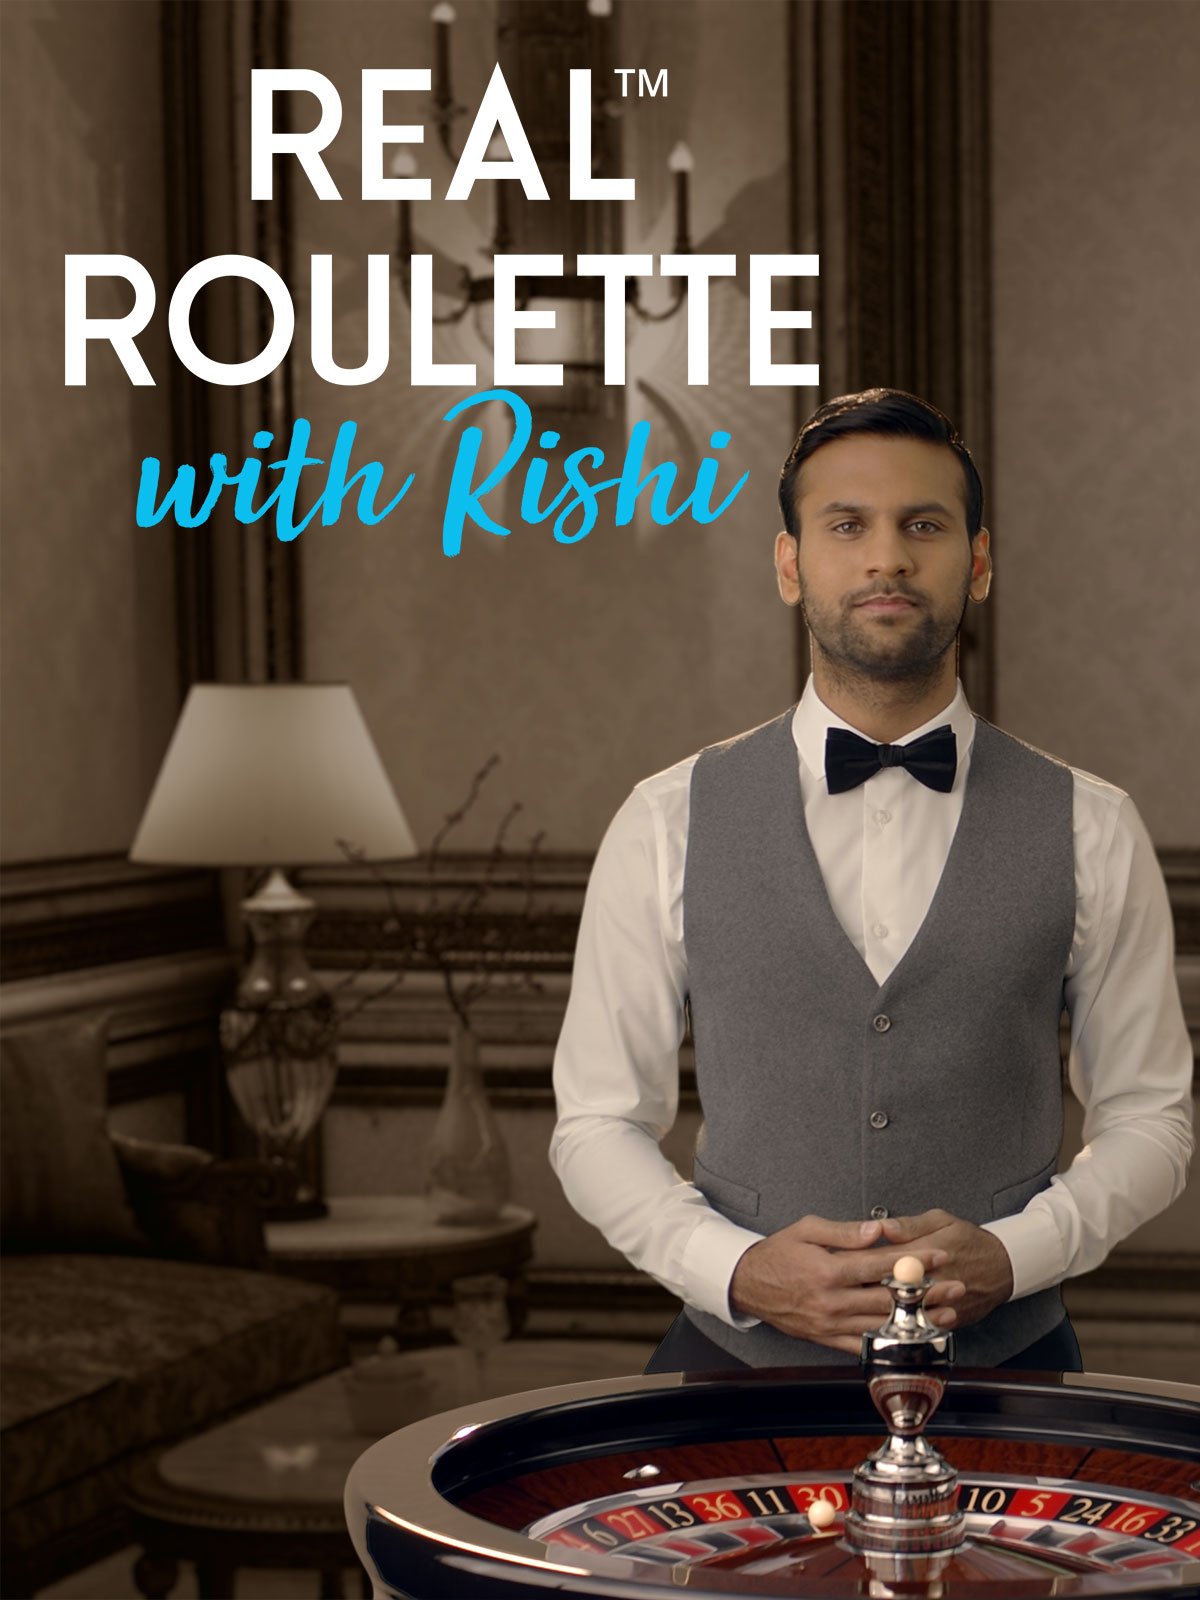 Real Roulette with Rishi™